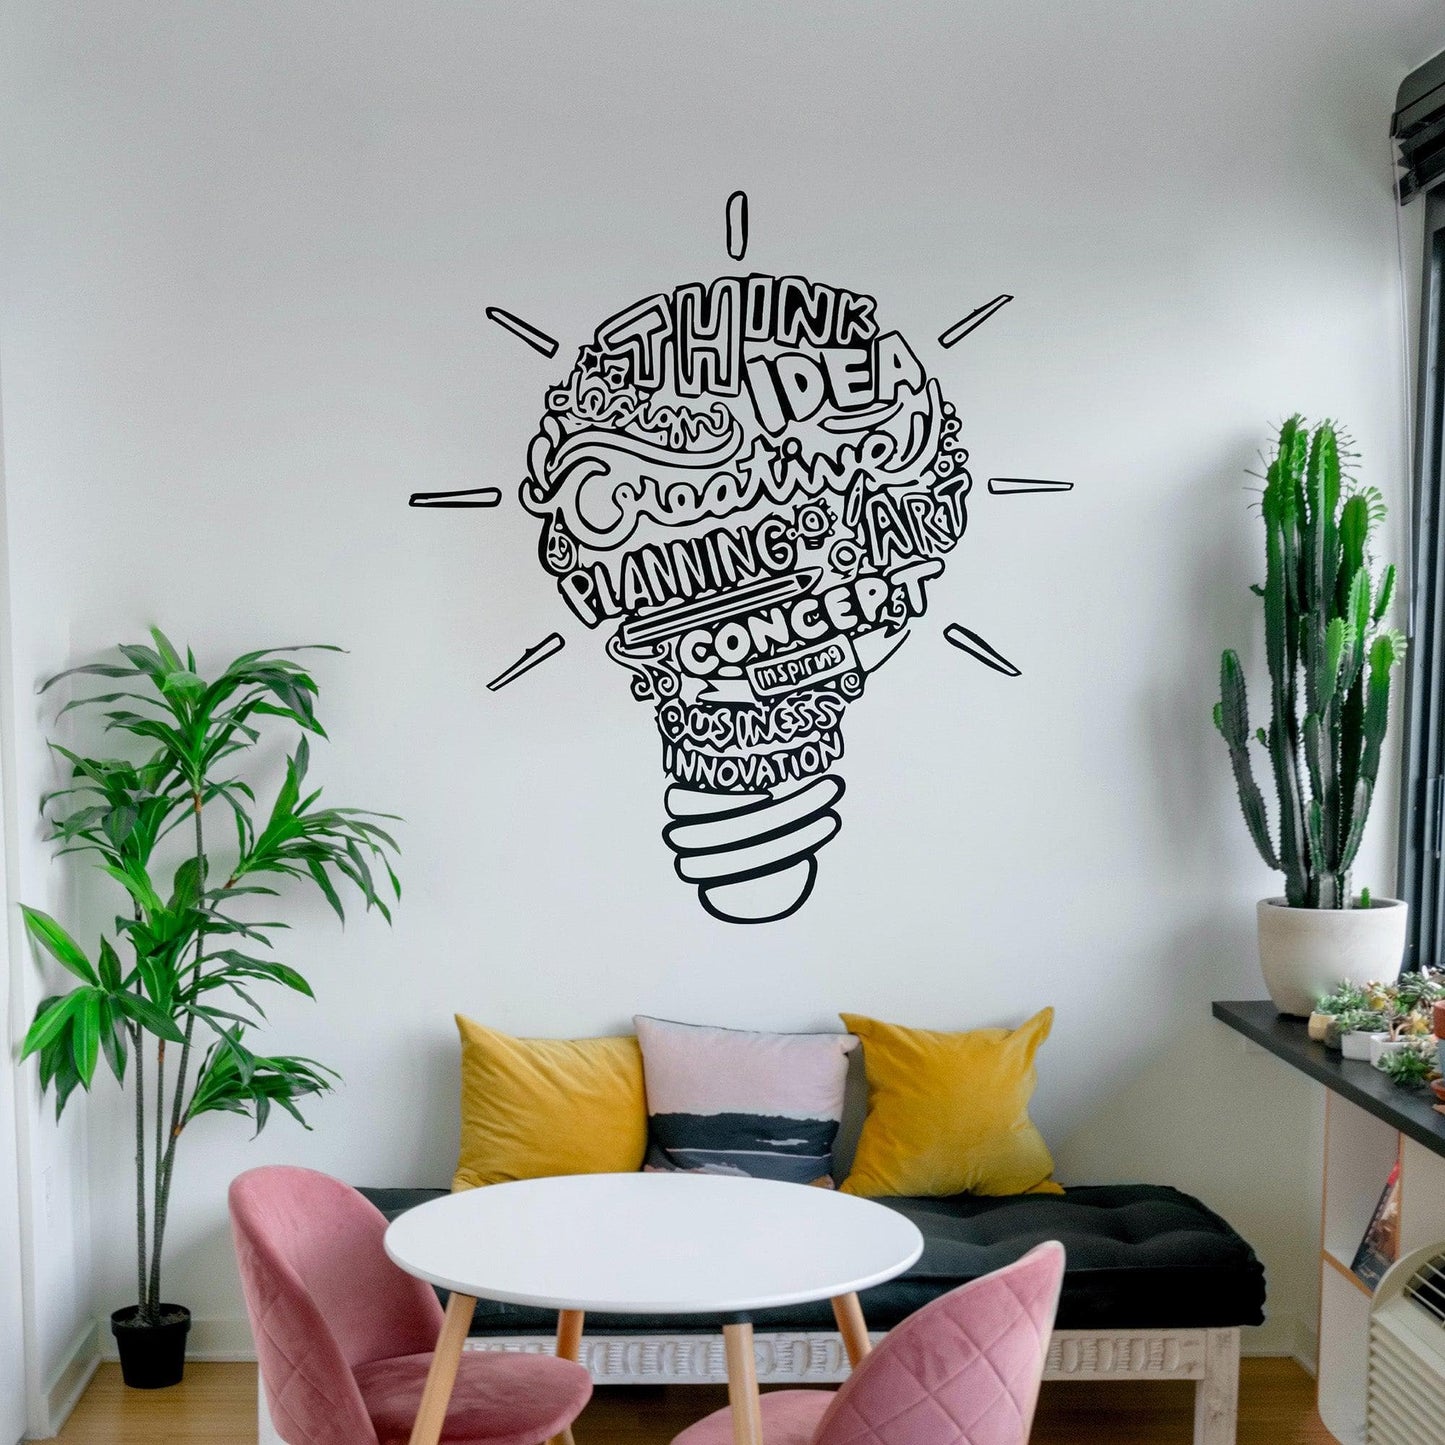 Lightbulb Motivational Wall Decal Quote. Office Decor. #6669